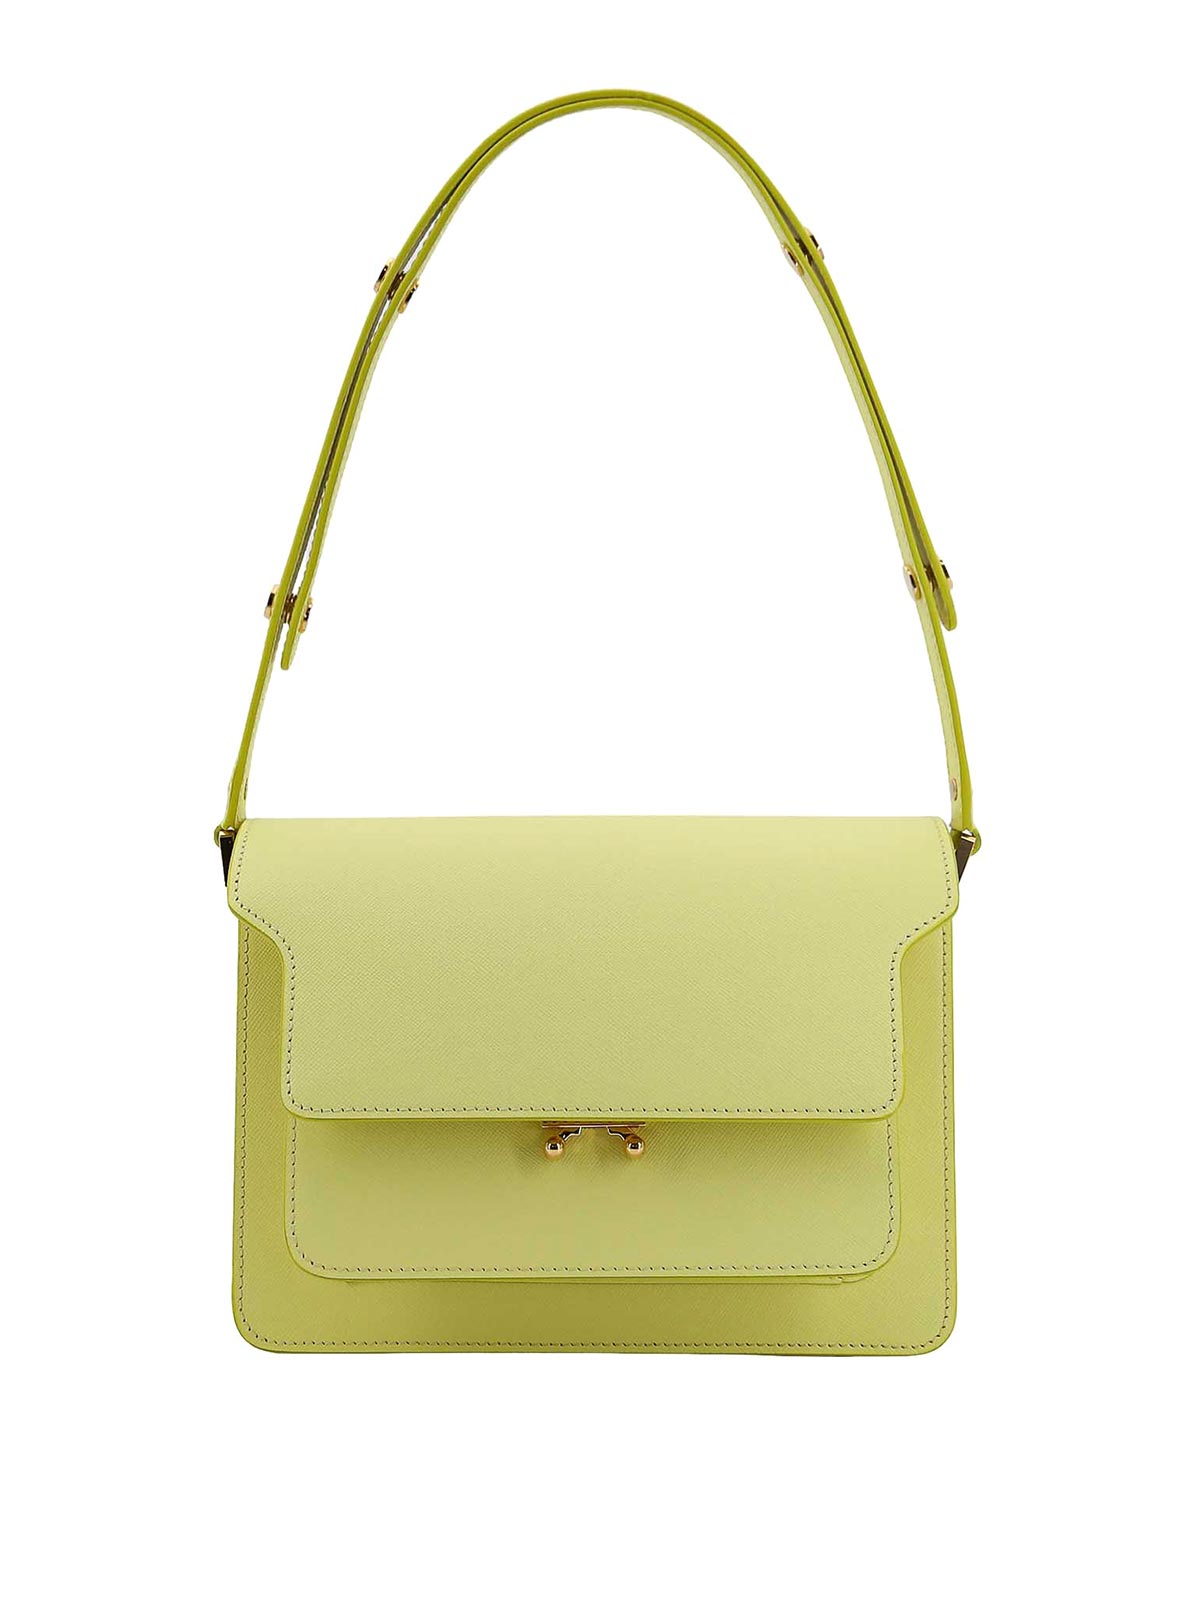 Marni Leather Shoulder Bag With Bellows Detail In Yellow